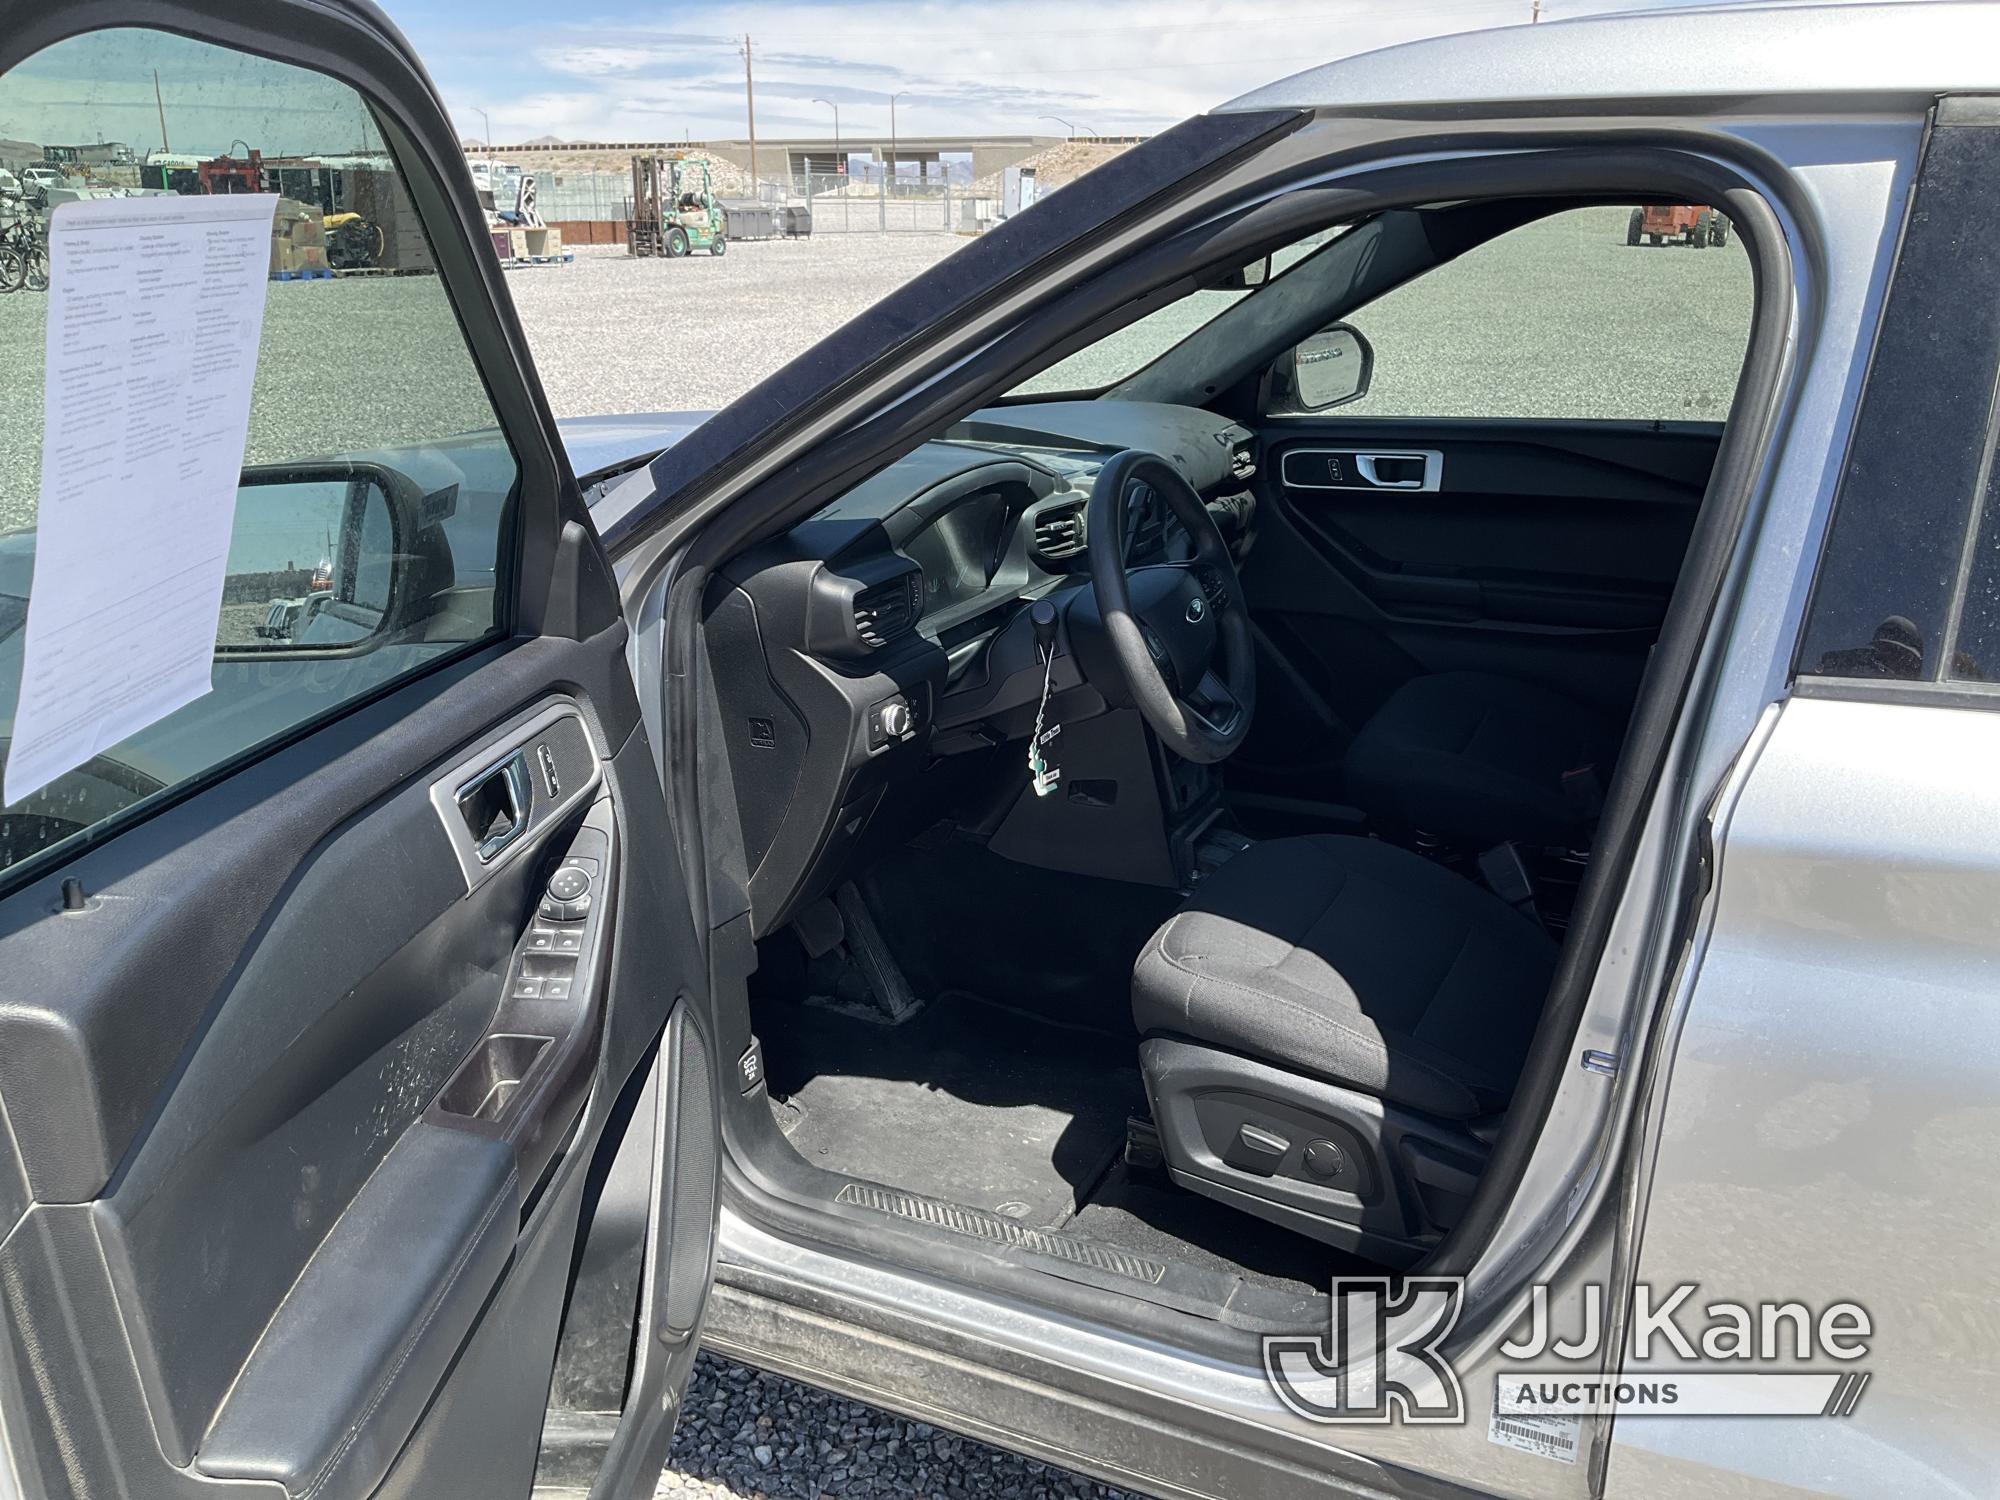 (Las Vegas, NV) 2020 Ford Explorer AWD Police Interceptor No Console Check Engine Light On, Traction